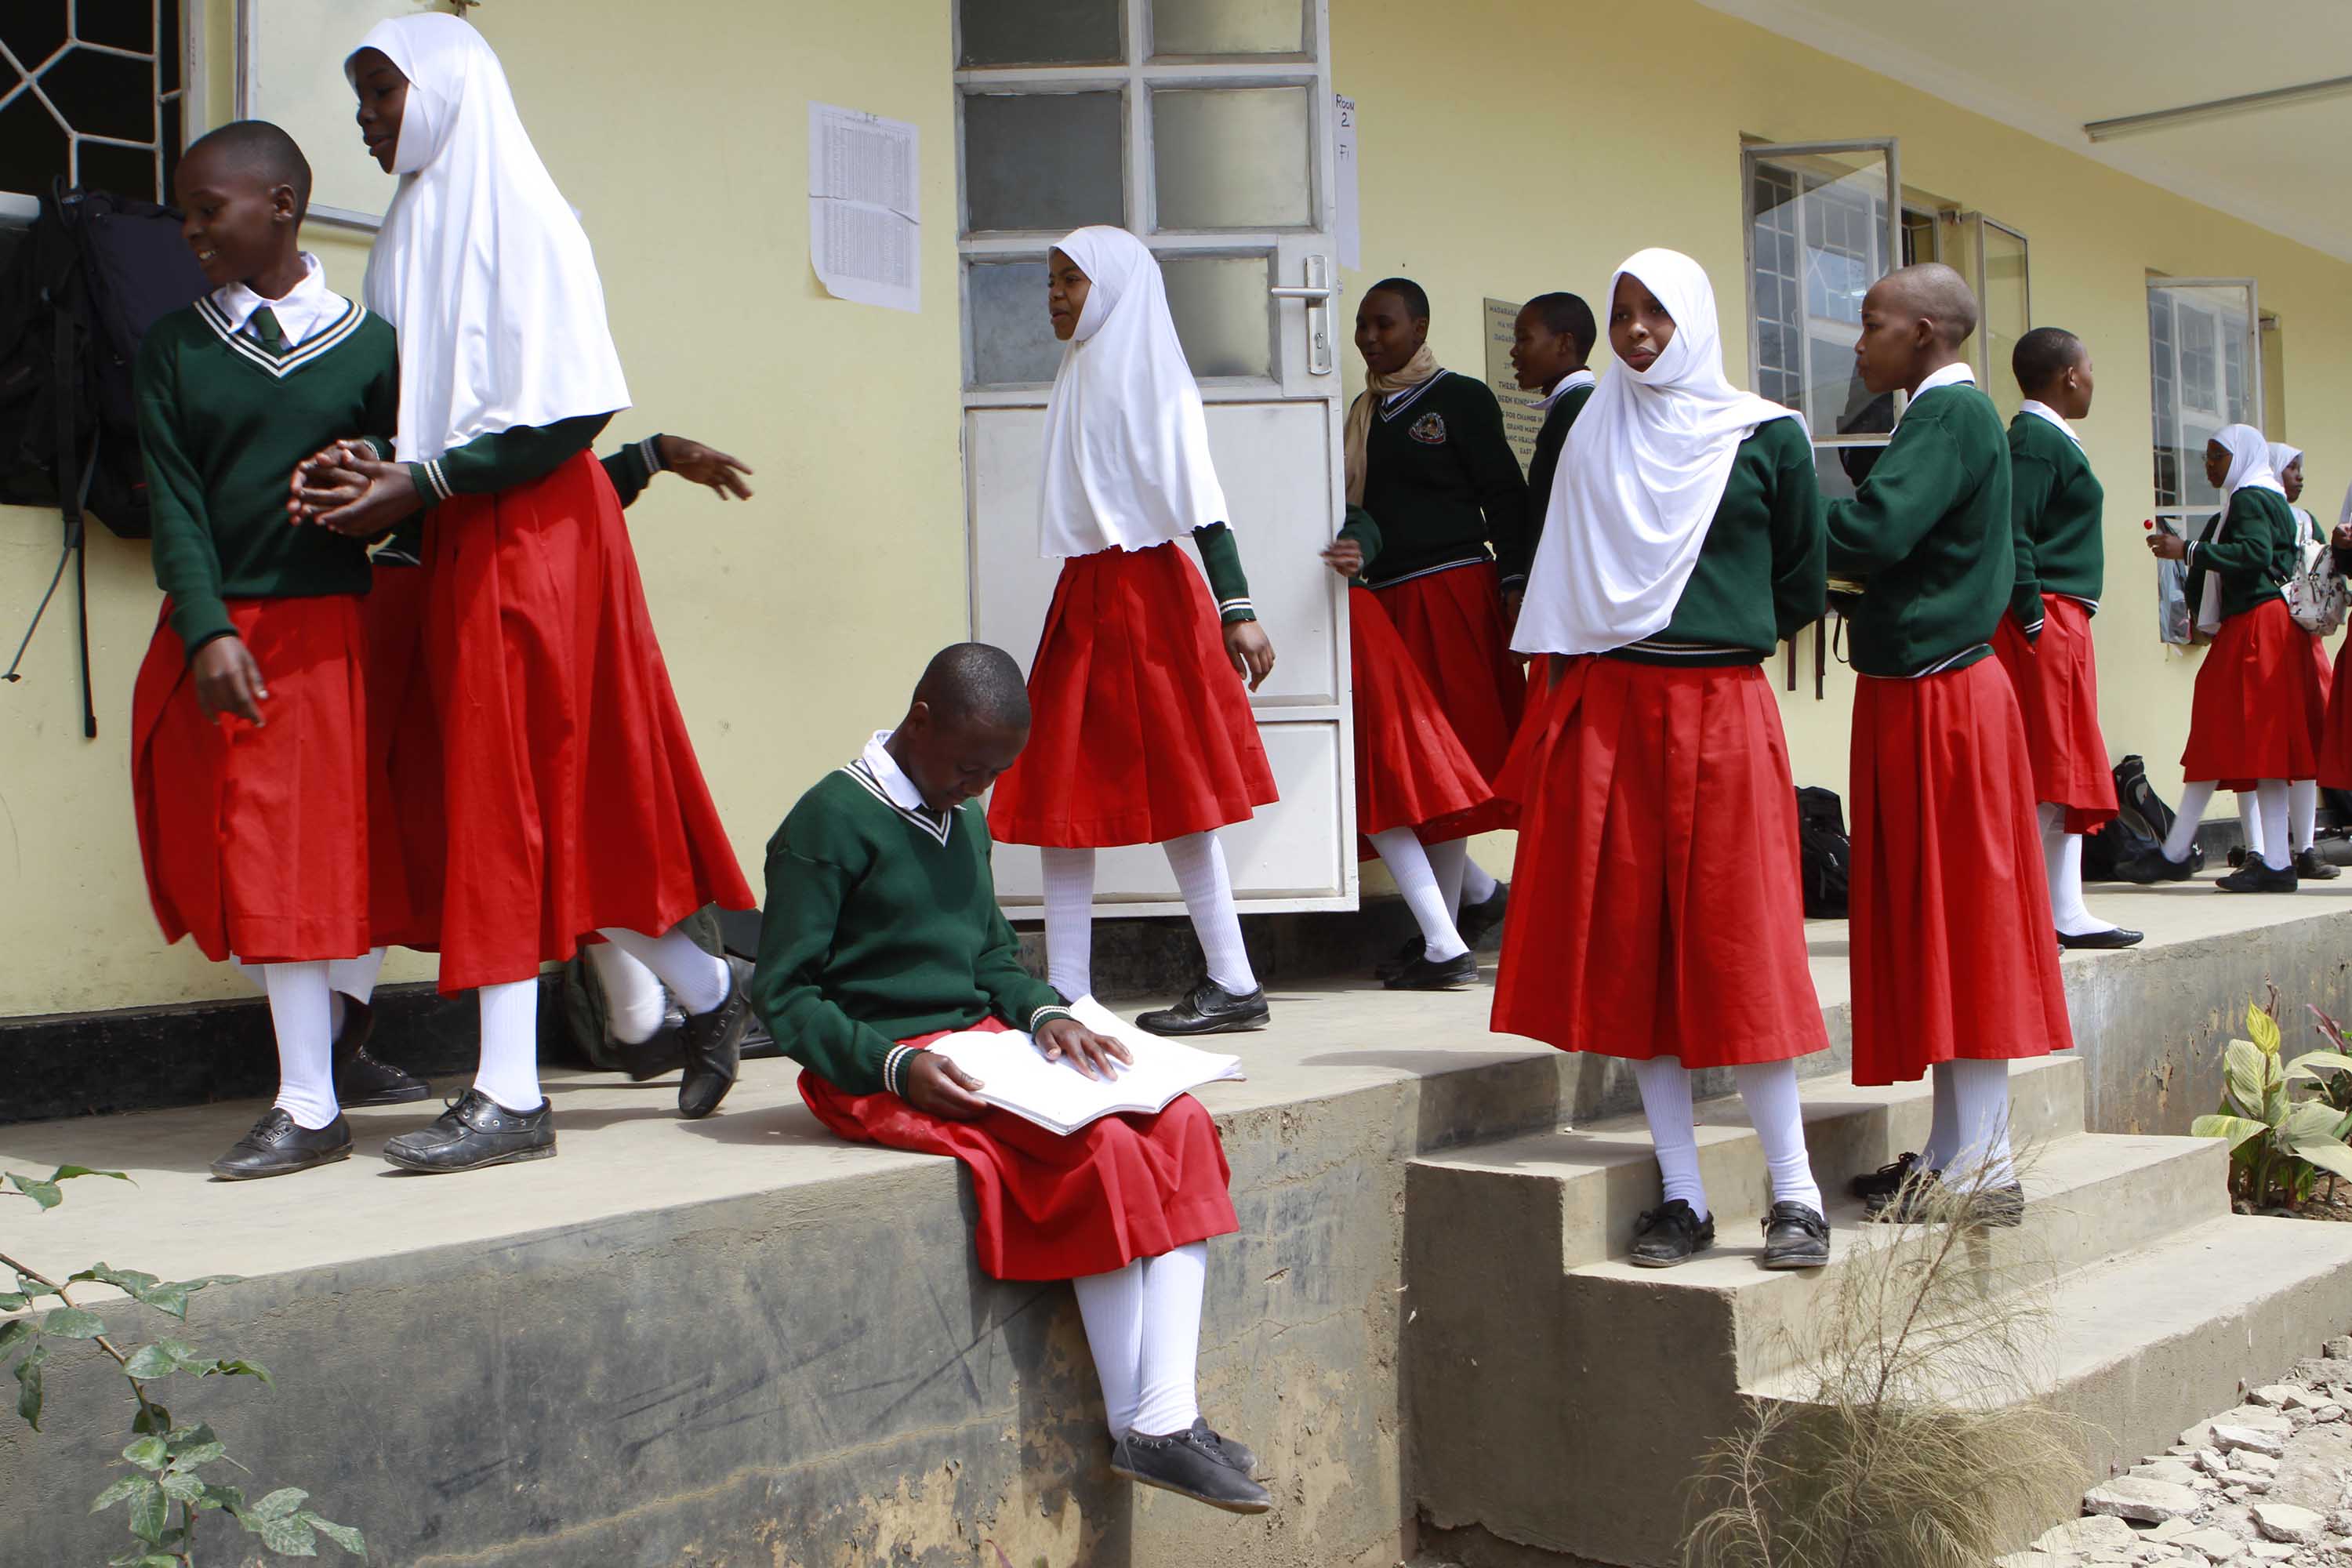 Girls gather between lessons at Arusha Secondary School. At least once a semester, after coming back from holidays, the girls are rounded up in the dining hall for a mandatory pregnancy test.